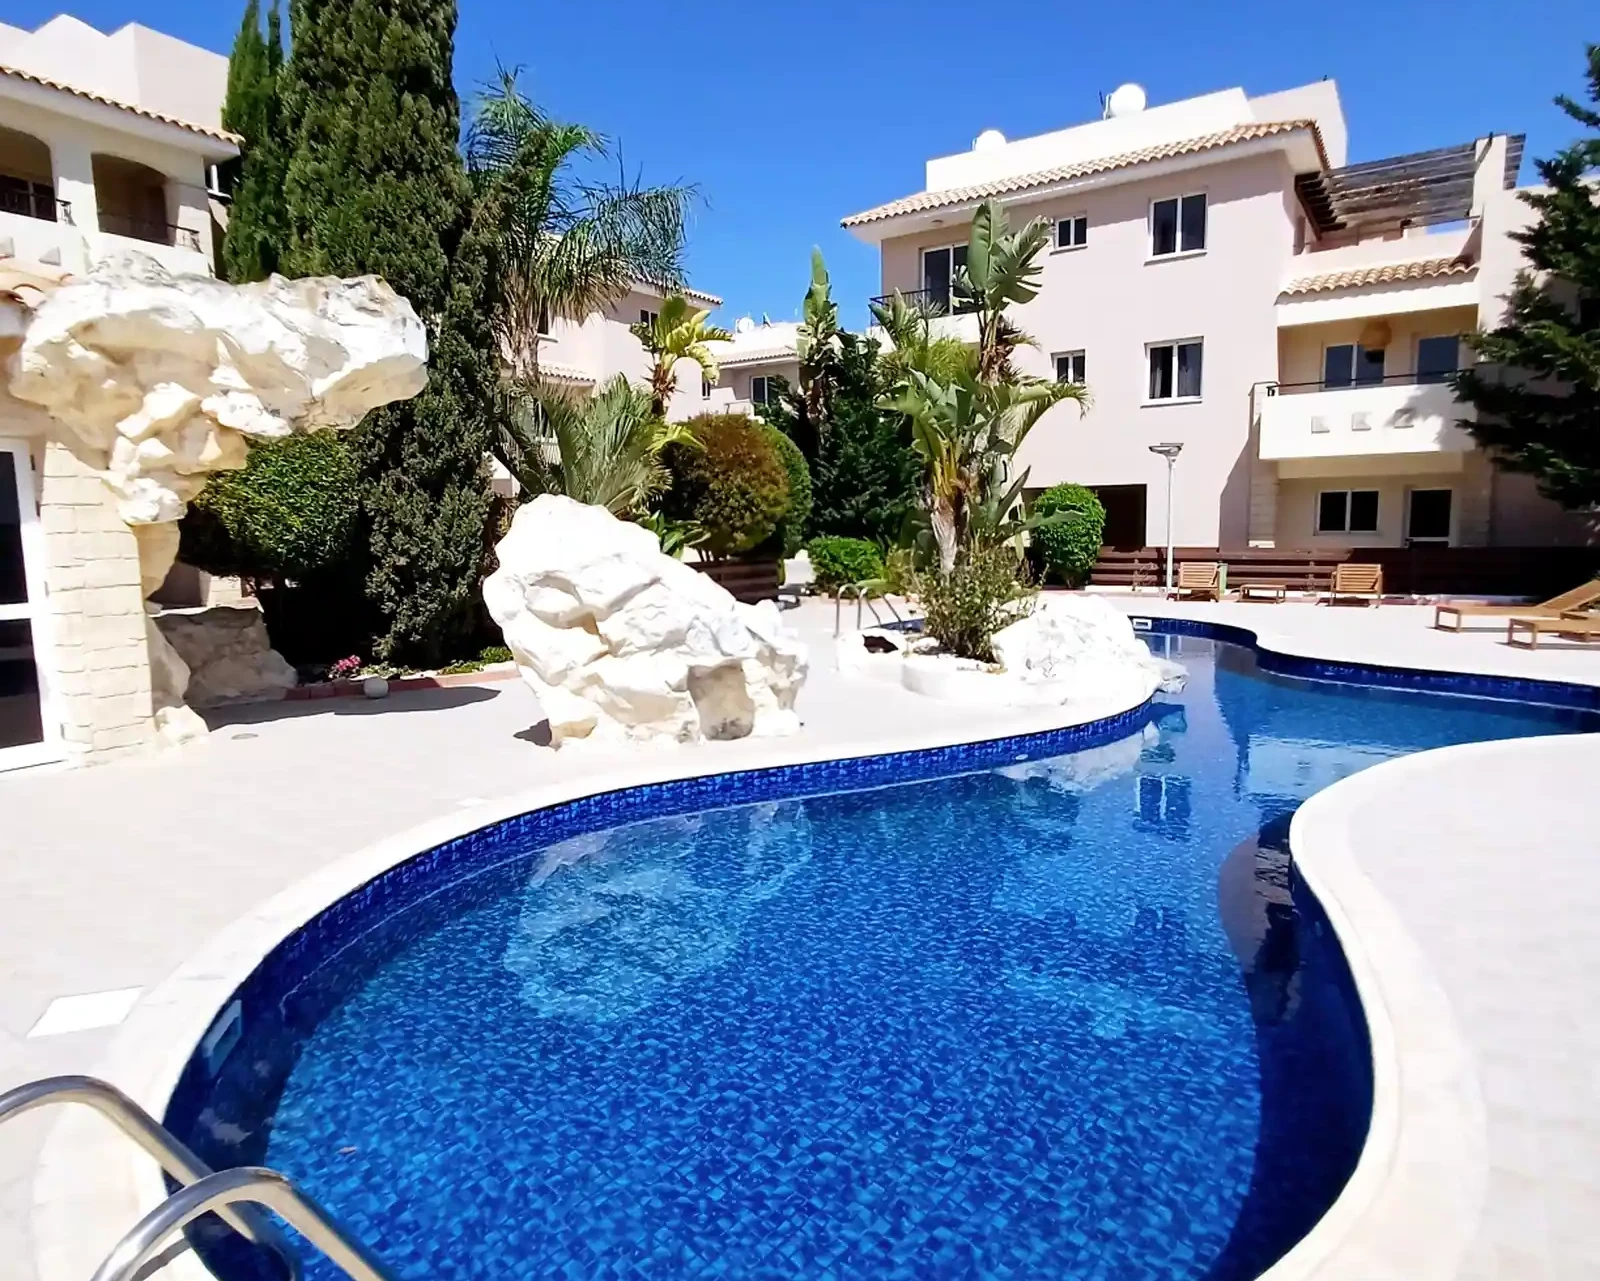 1-bedroom apartment fоr sаle €90.000, image 1